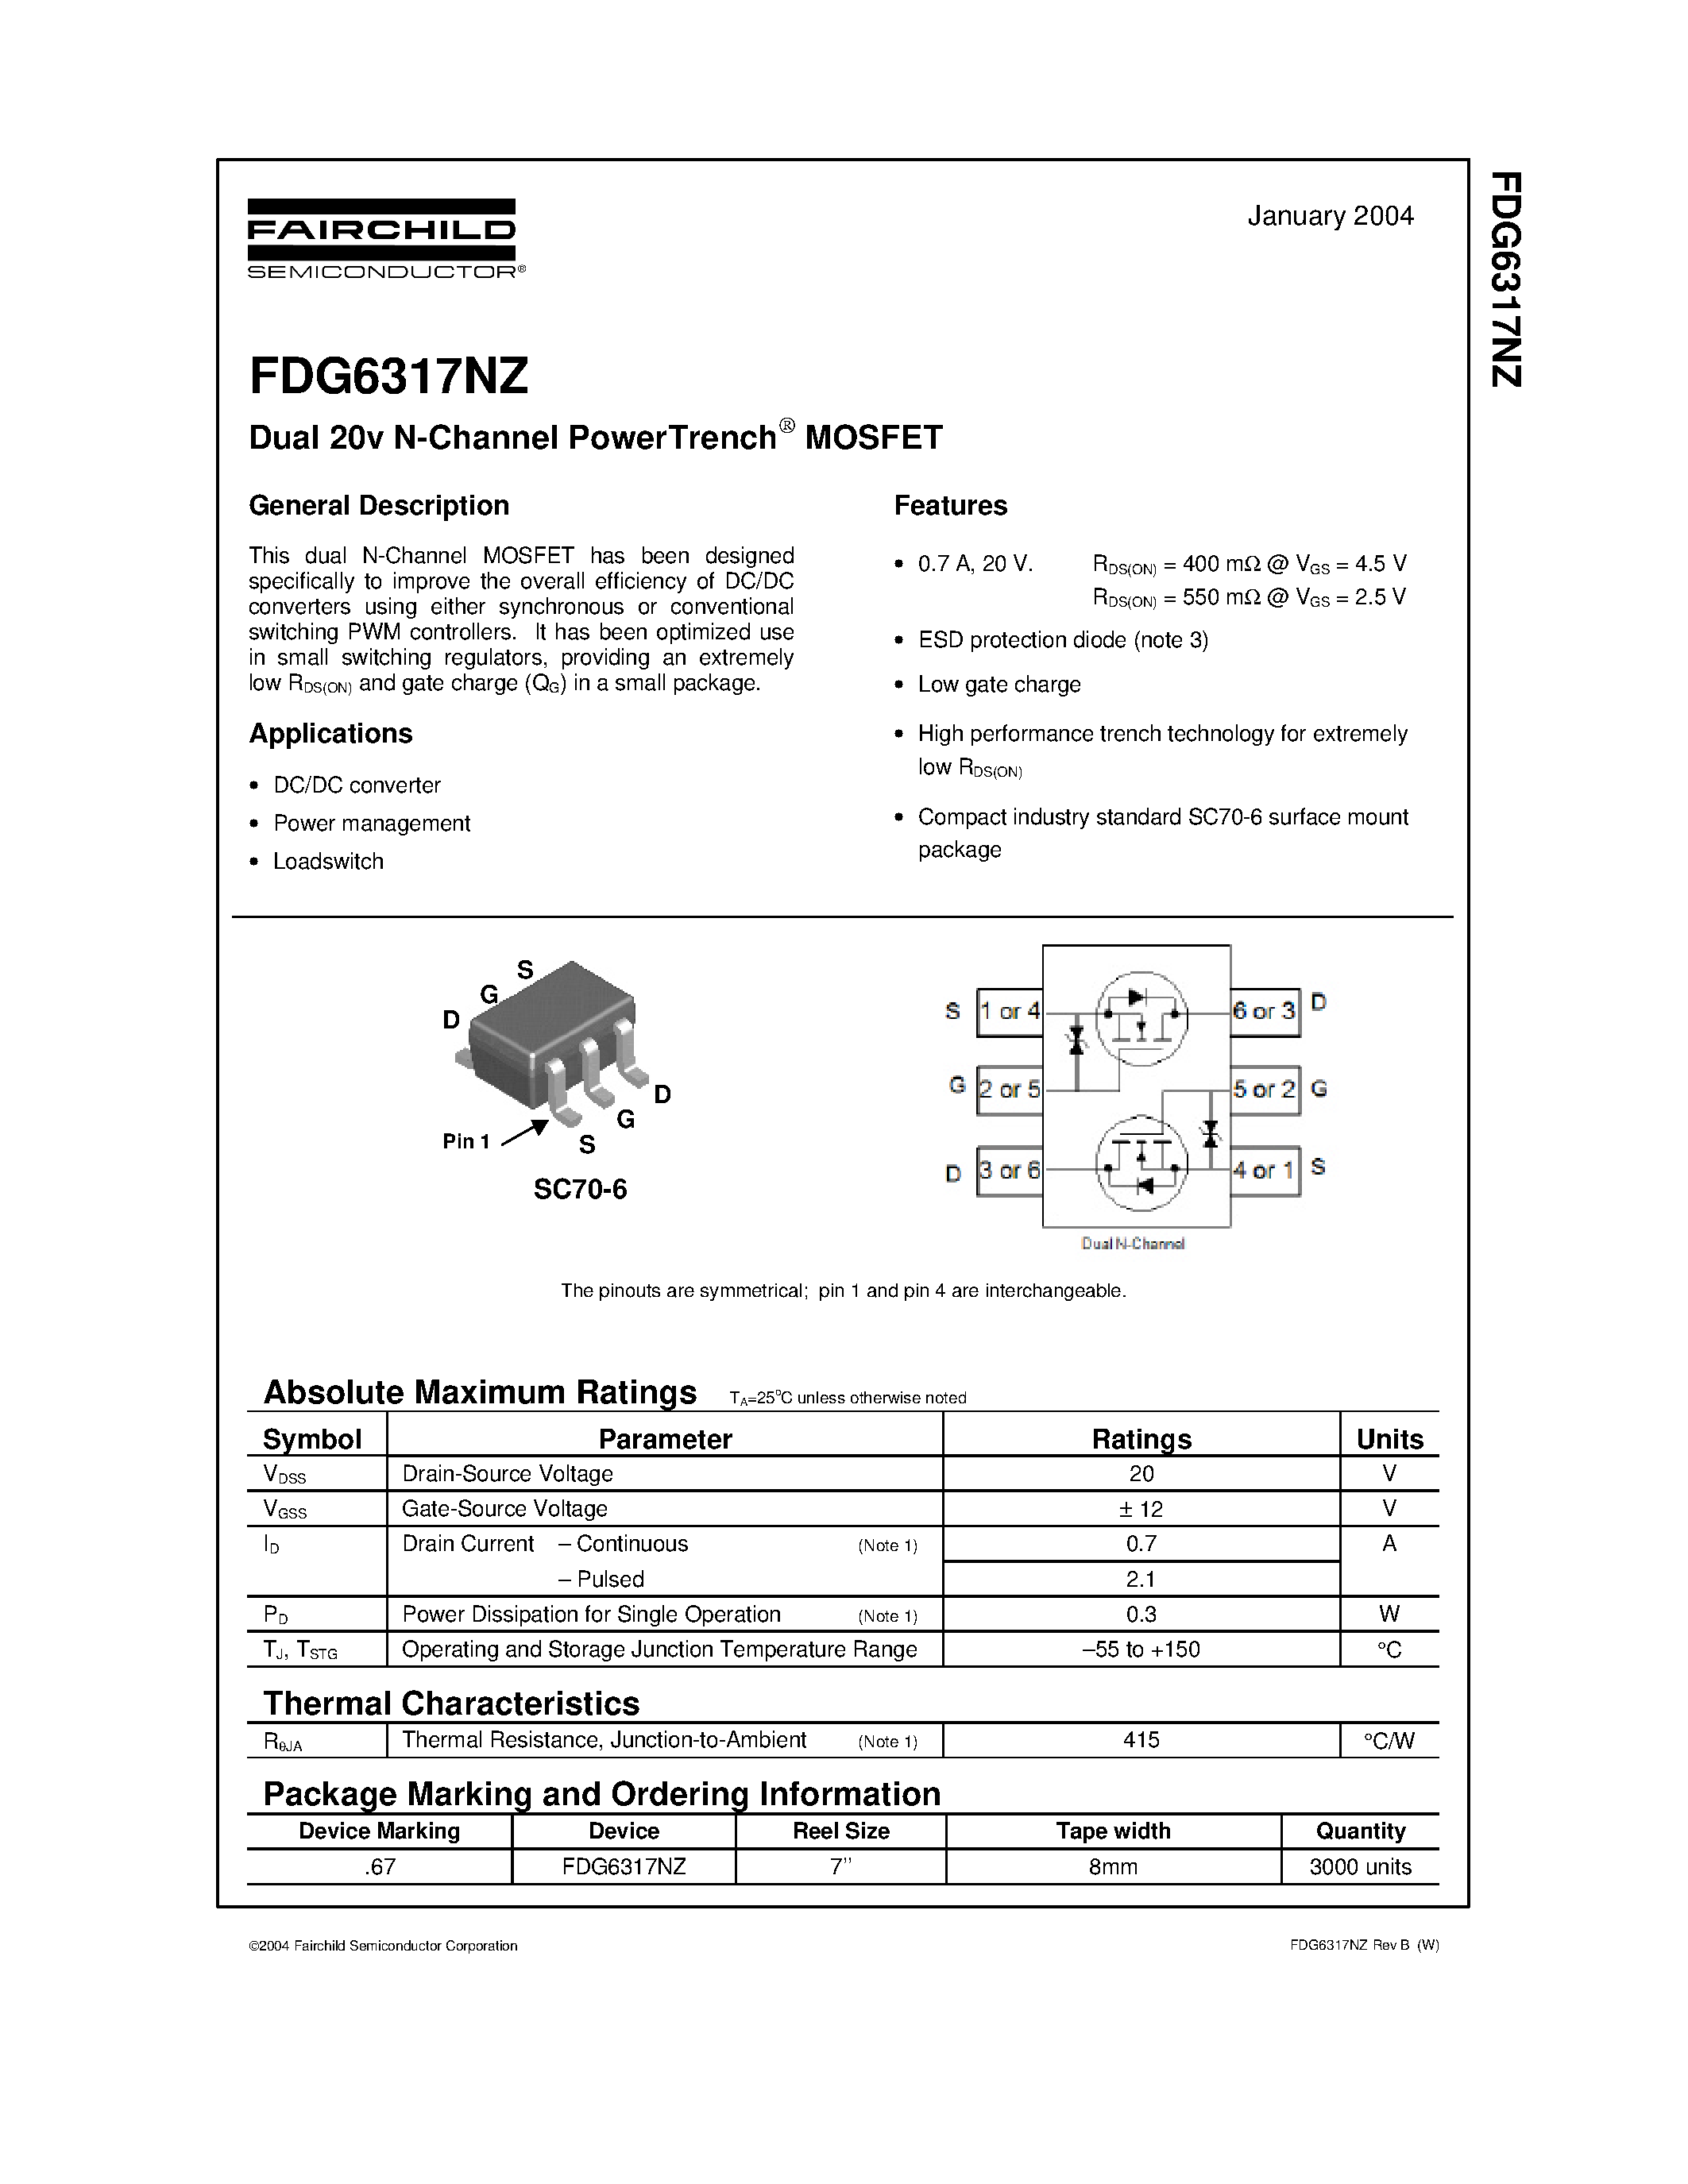 Datasheet FDG6317NZ - Dual 20v N-Channel PowerTrench MOSFET page 1